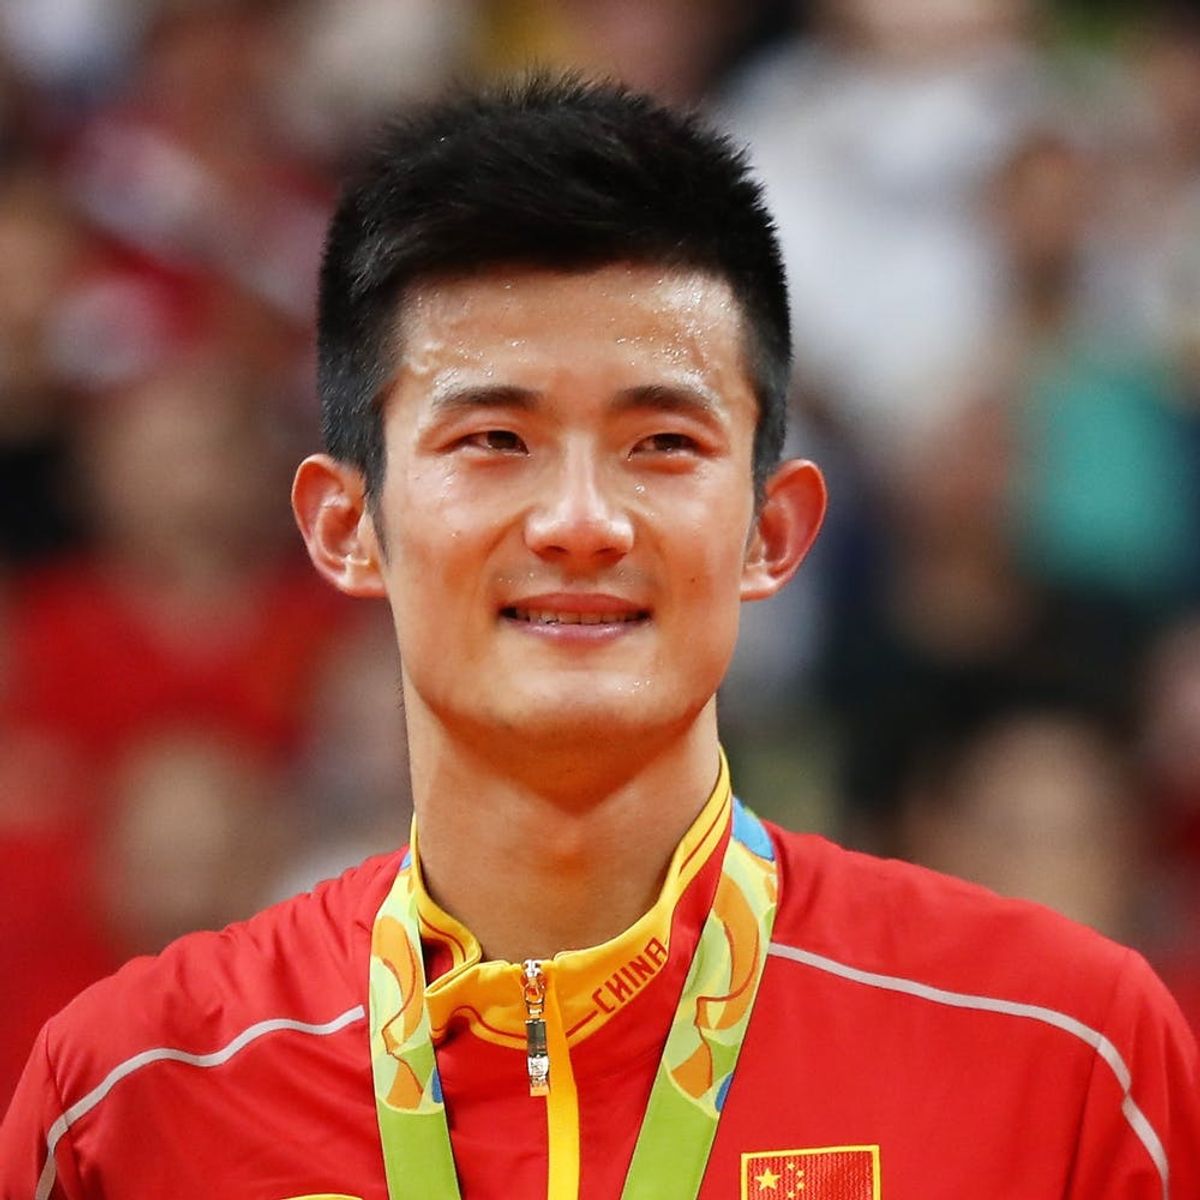 This Badminton Player’s Reaction to Winning Gold Will Hit You Right in the Feels